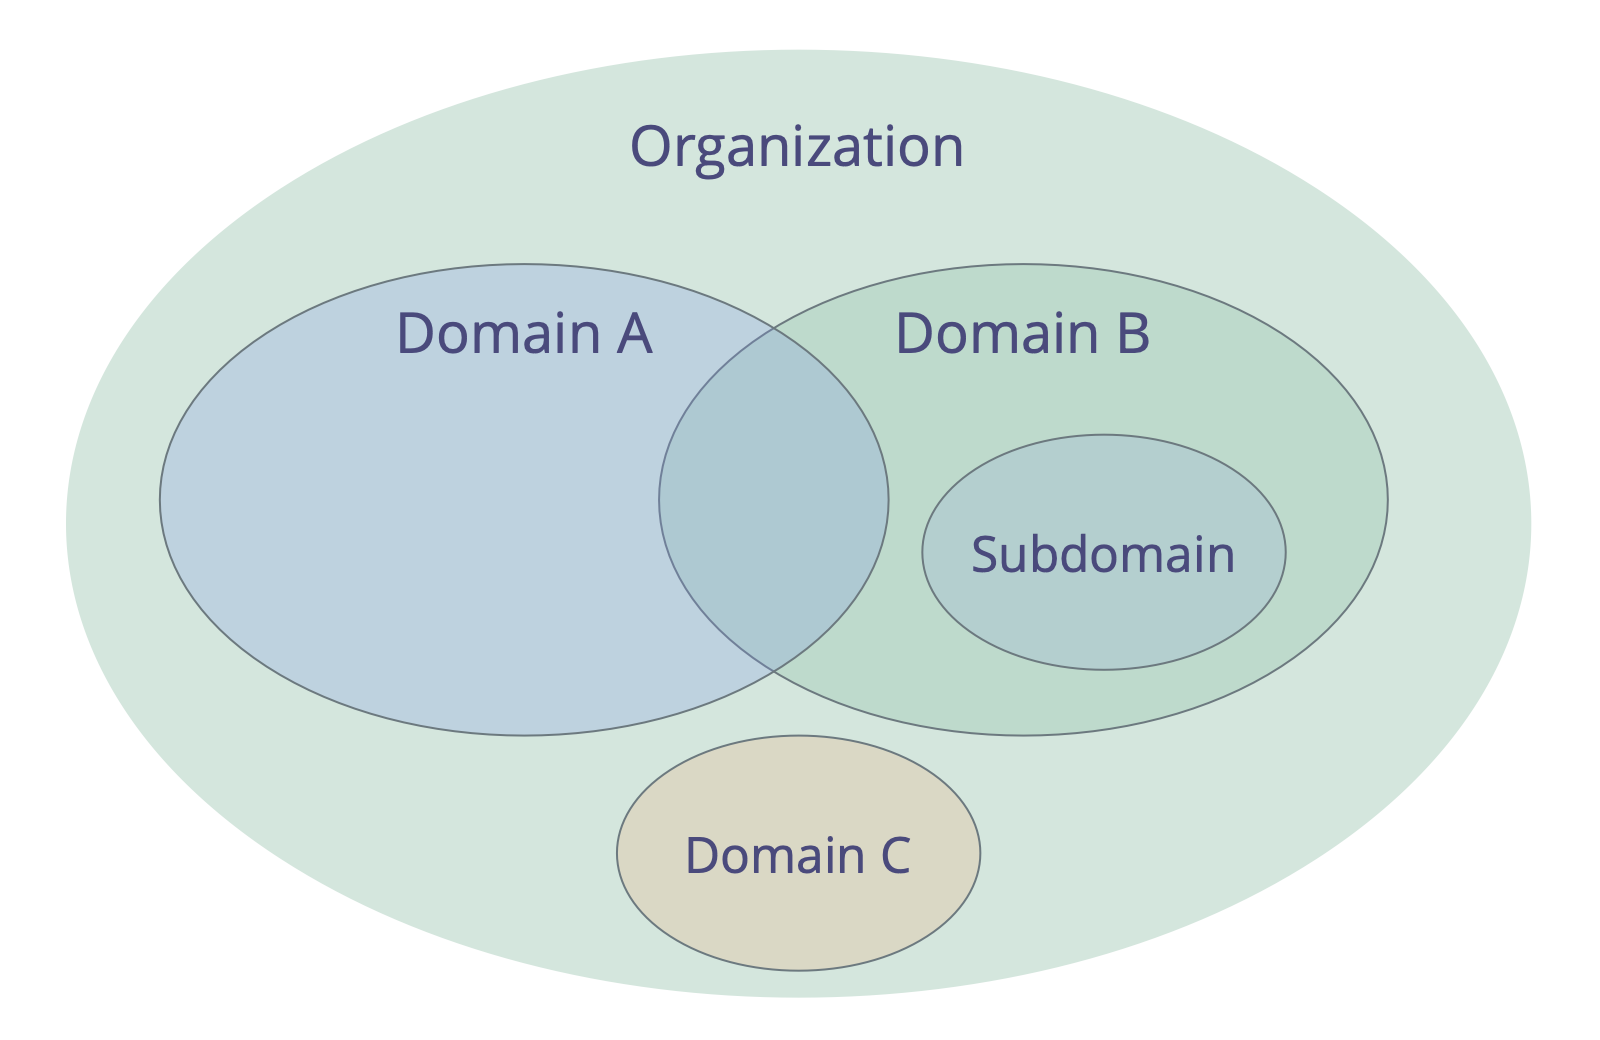 Domains may overlap or be fully contained within other domains